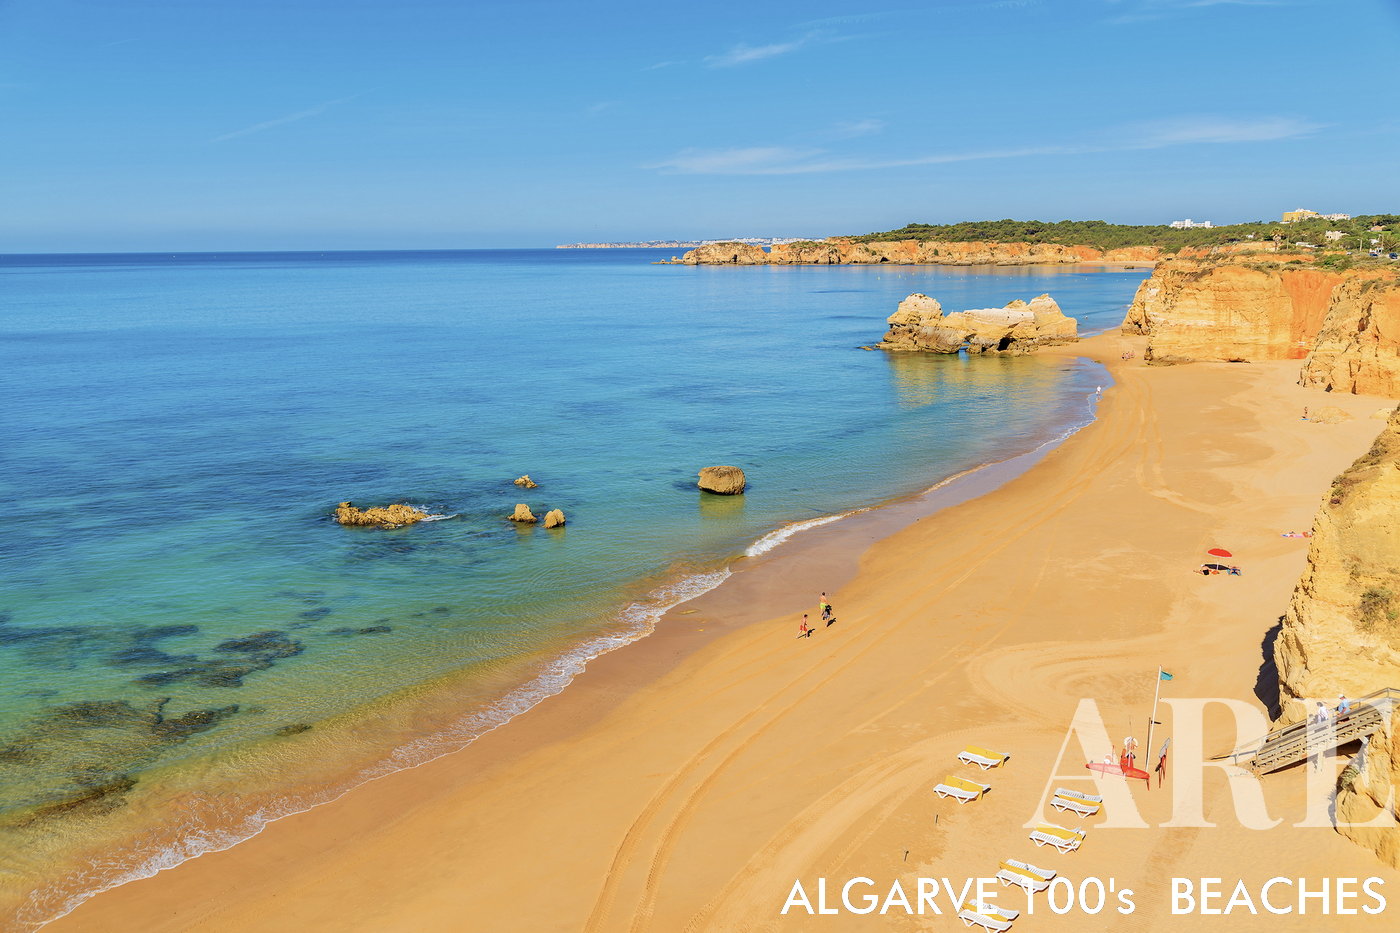 Amado Beach, situated in the charming city of Portimão on Portugal's southern coast, is a tranquil oasis distinct from the well-known Amado Surf Beach further west. This lovely spot is nestled in a quieter part of the city, providing a serene escape from the bustle.